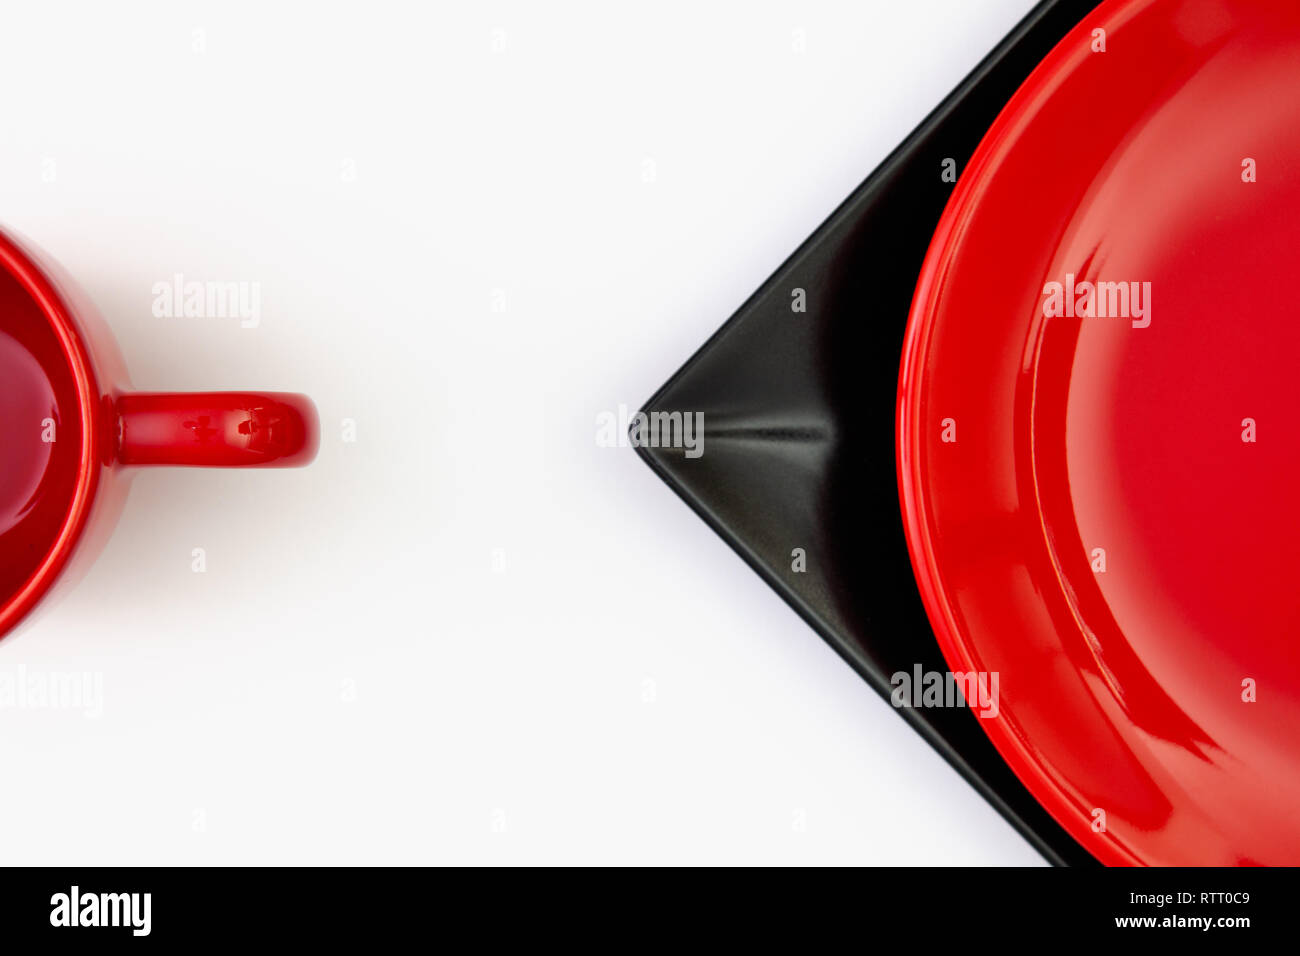 Different  red and black plates and red cup on the white table.Top view. Flat Lay Image. Stock Photo